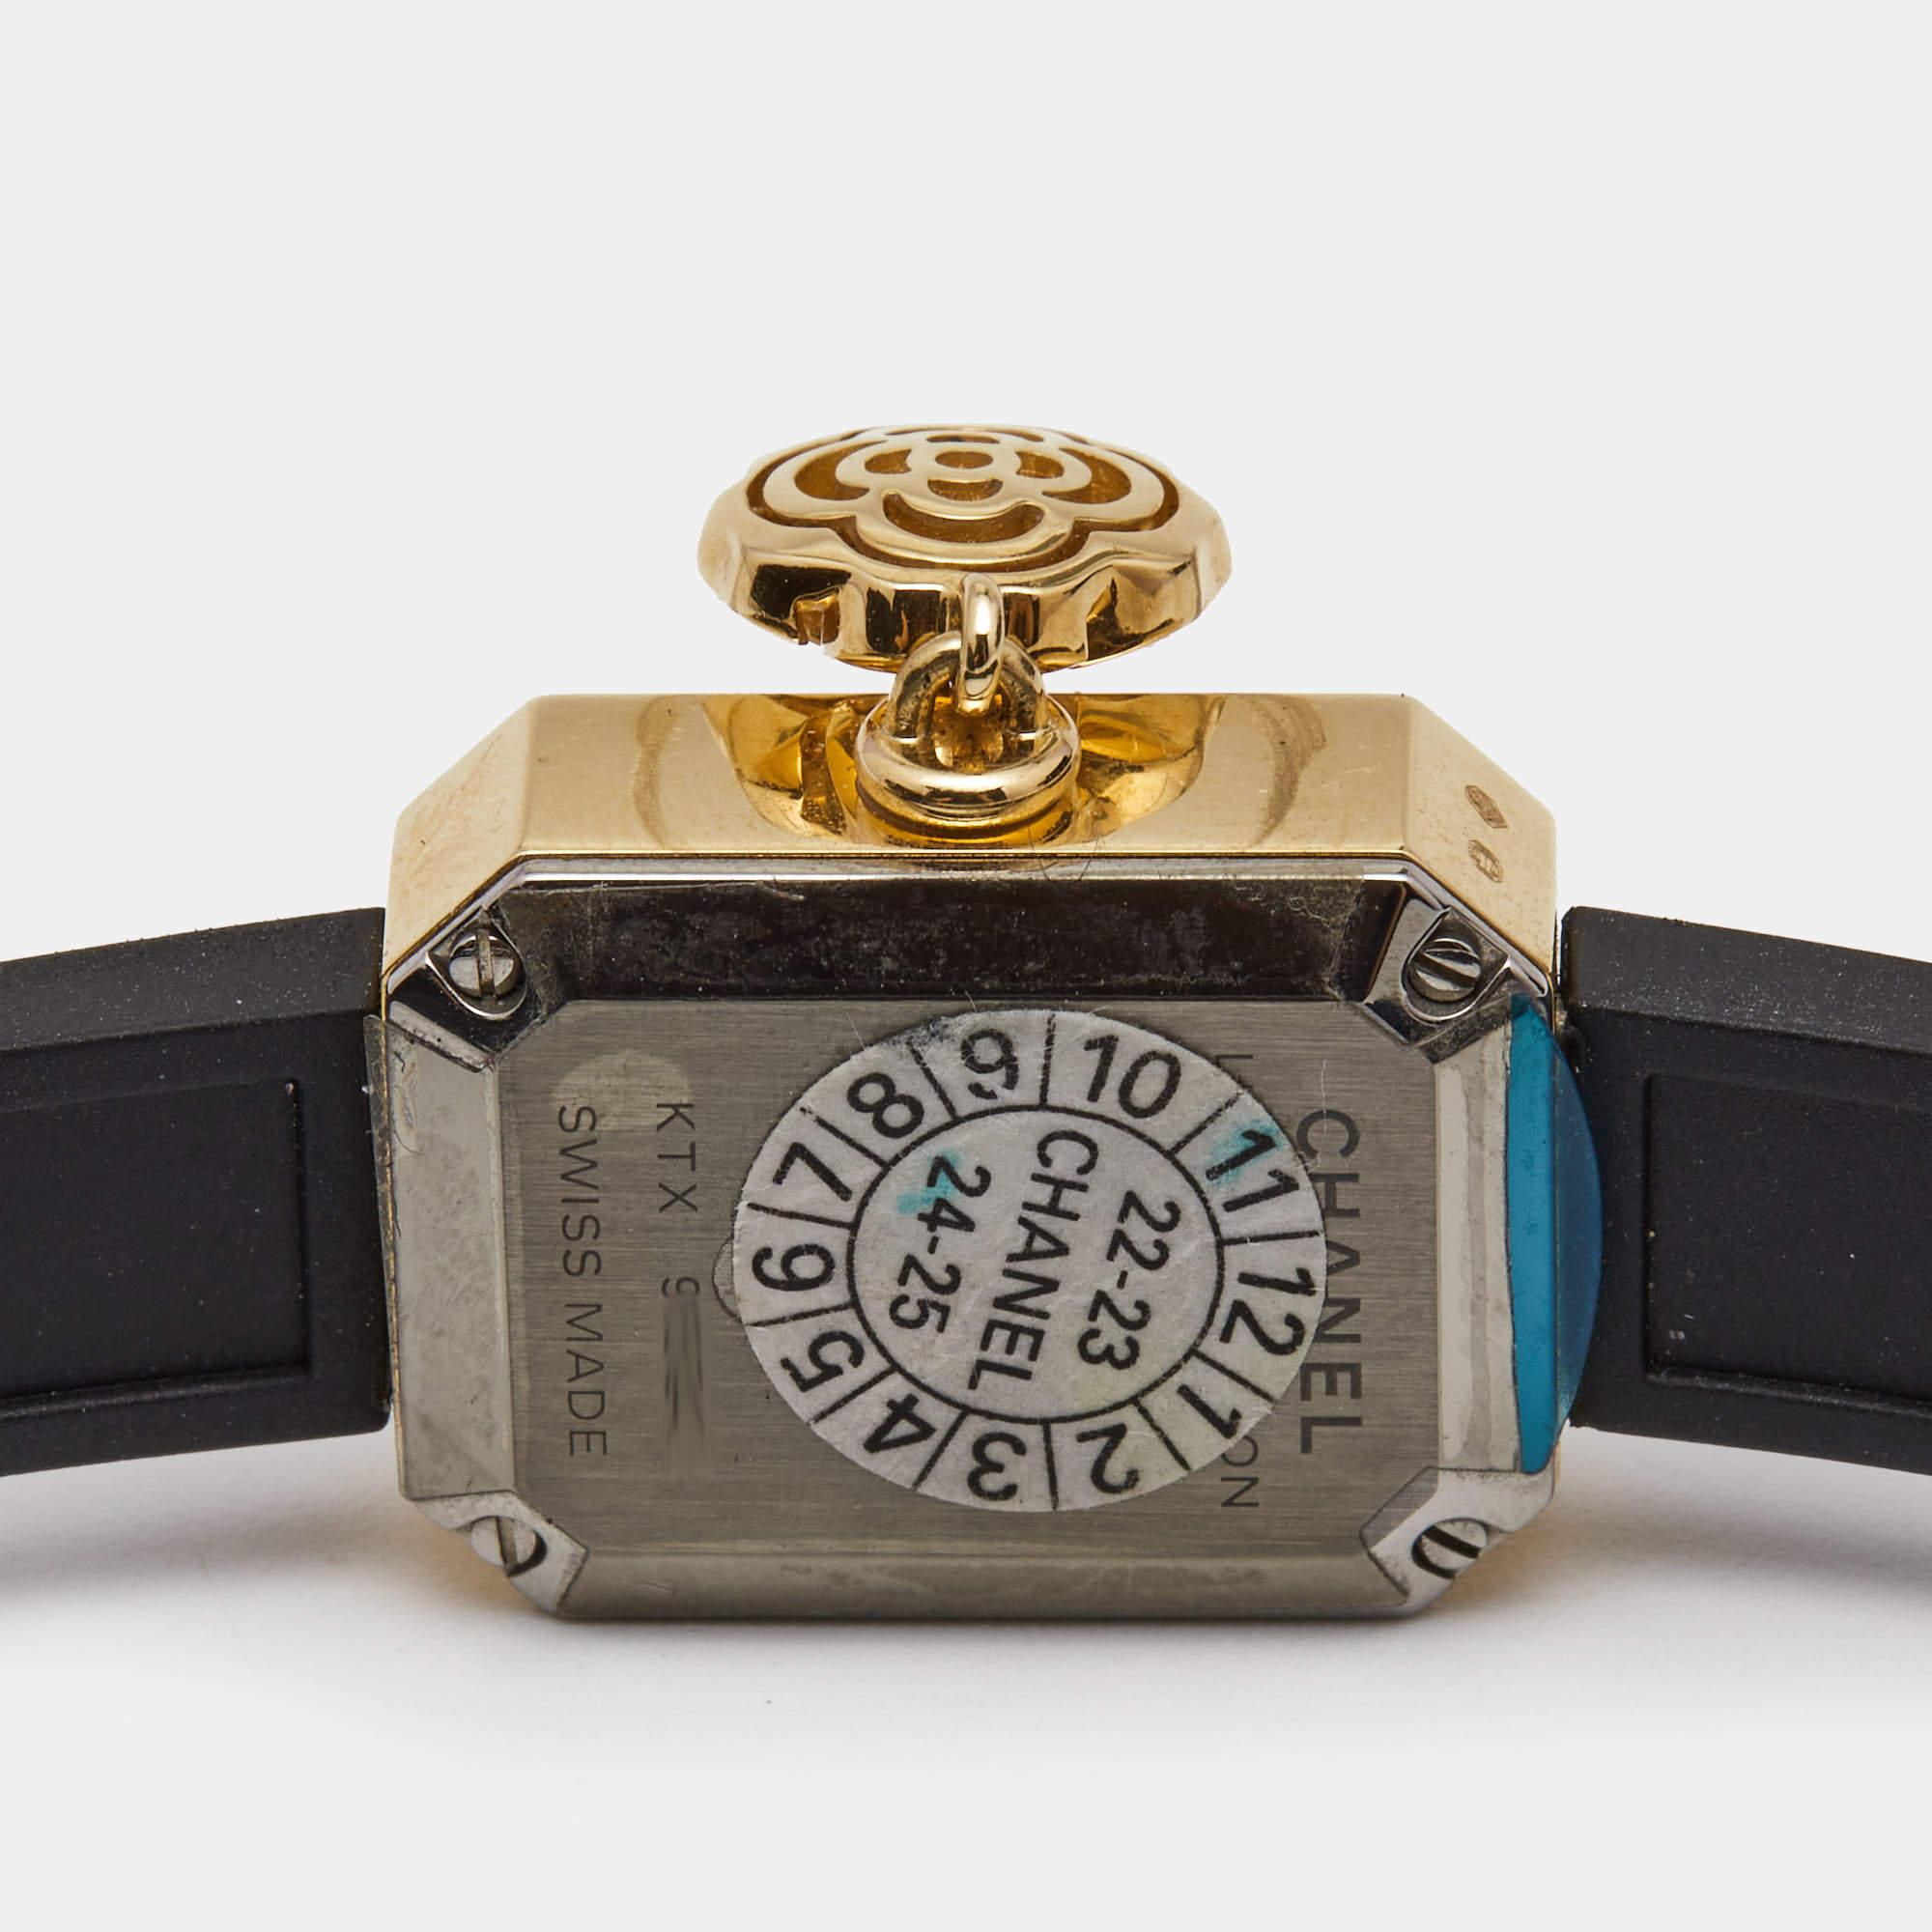 The Premiere watch by Chanel was the first timepiece from the house and instead of a round case, it has a rectangular one with cut edges, mimicking the bottle stopper of Chanel No.5 perfume. This Première Extrait De Camélia H6361 watch in 18k yellow